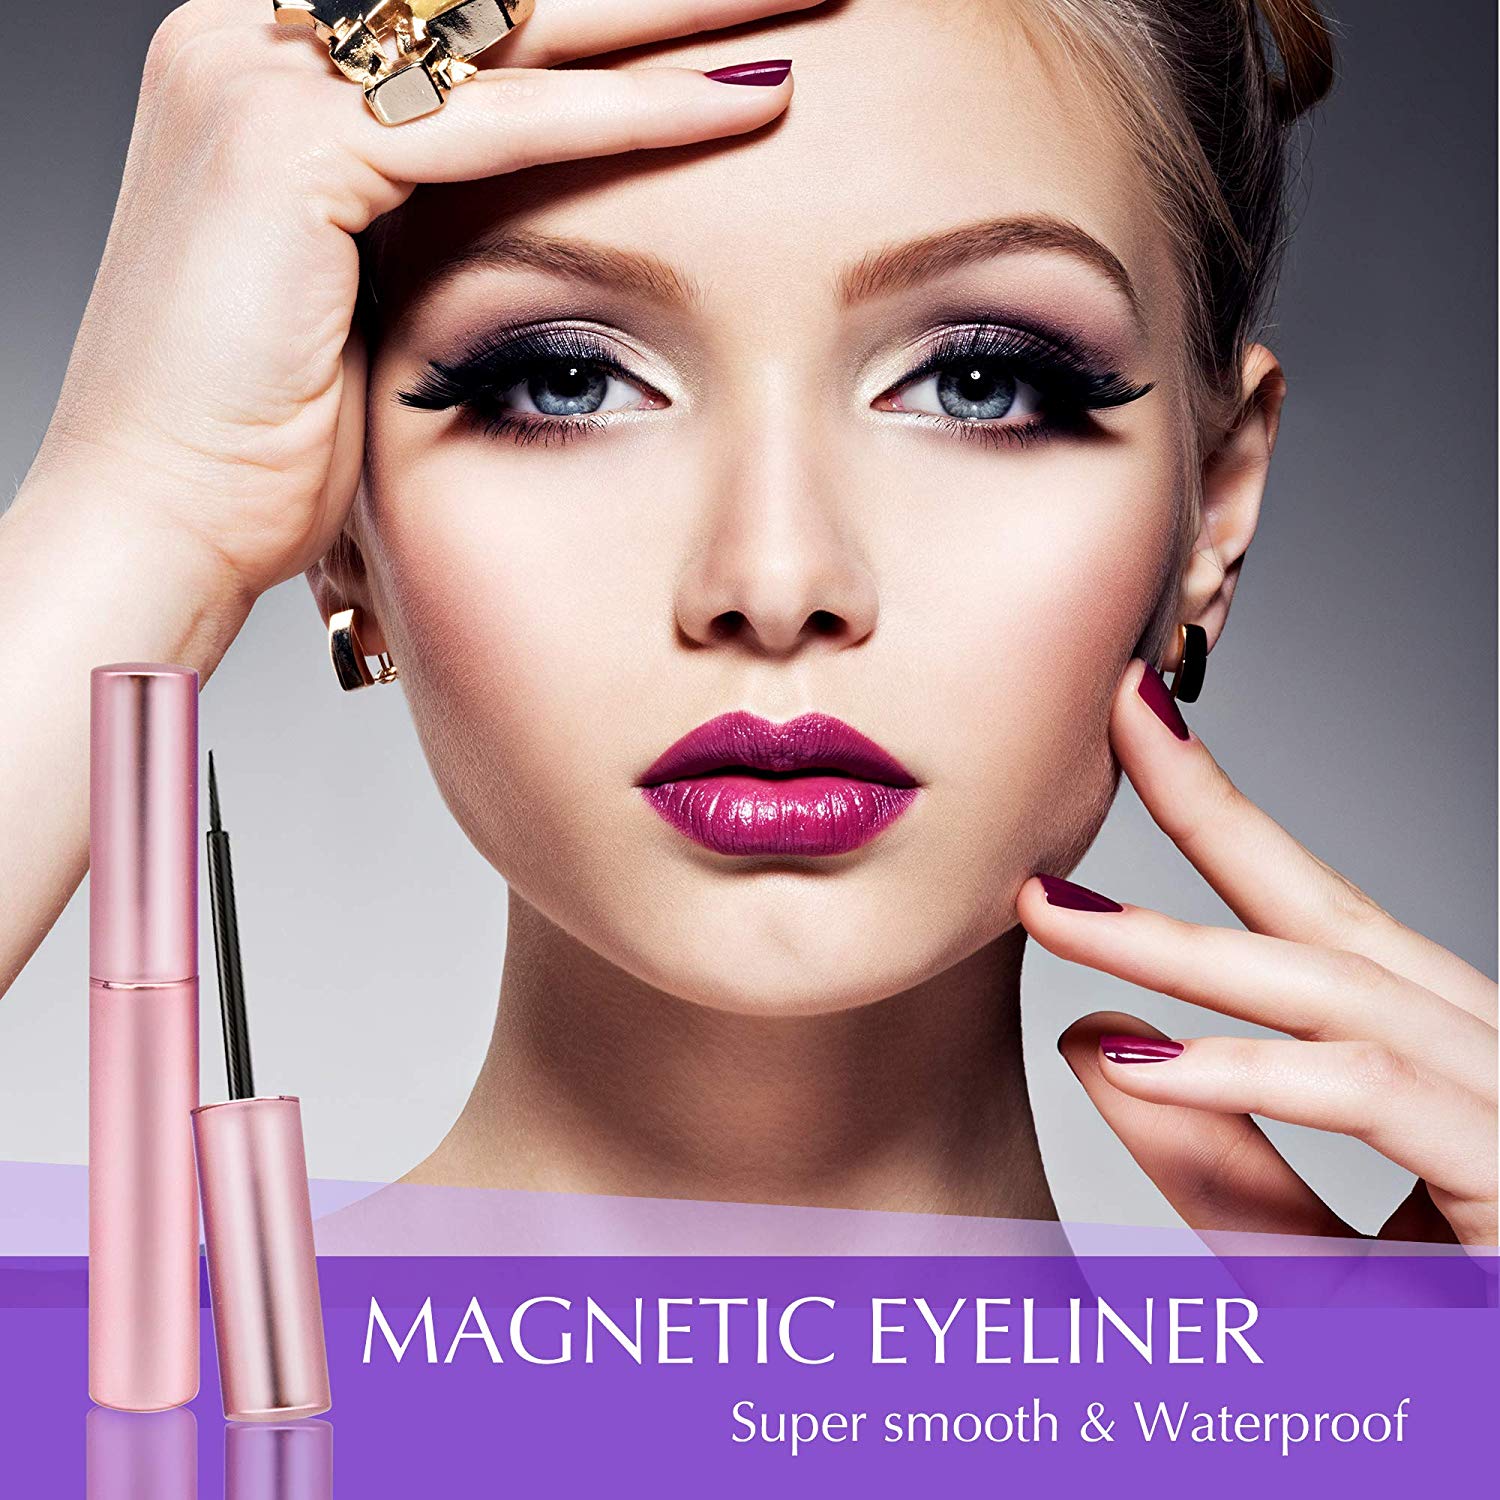 Arishine Magnetic Eyeliner and Lashes Kit - Makeup Accessories Online